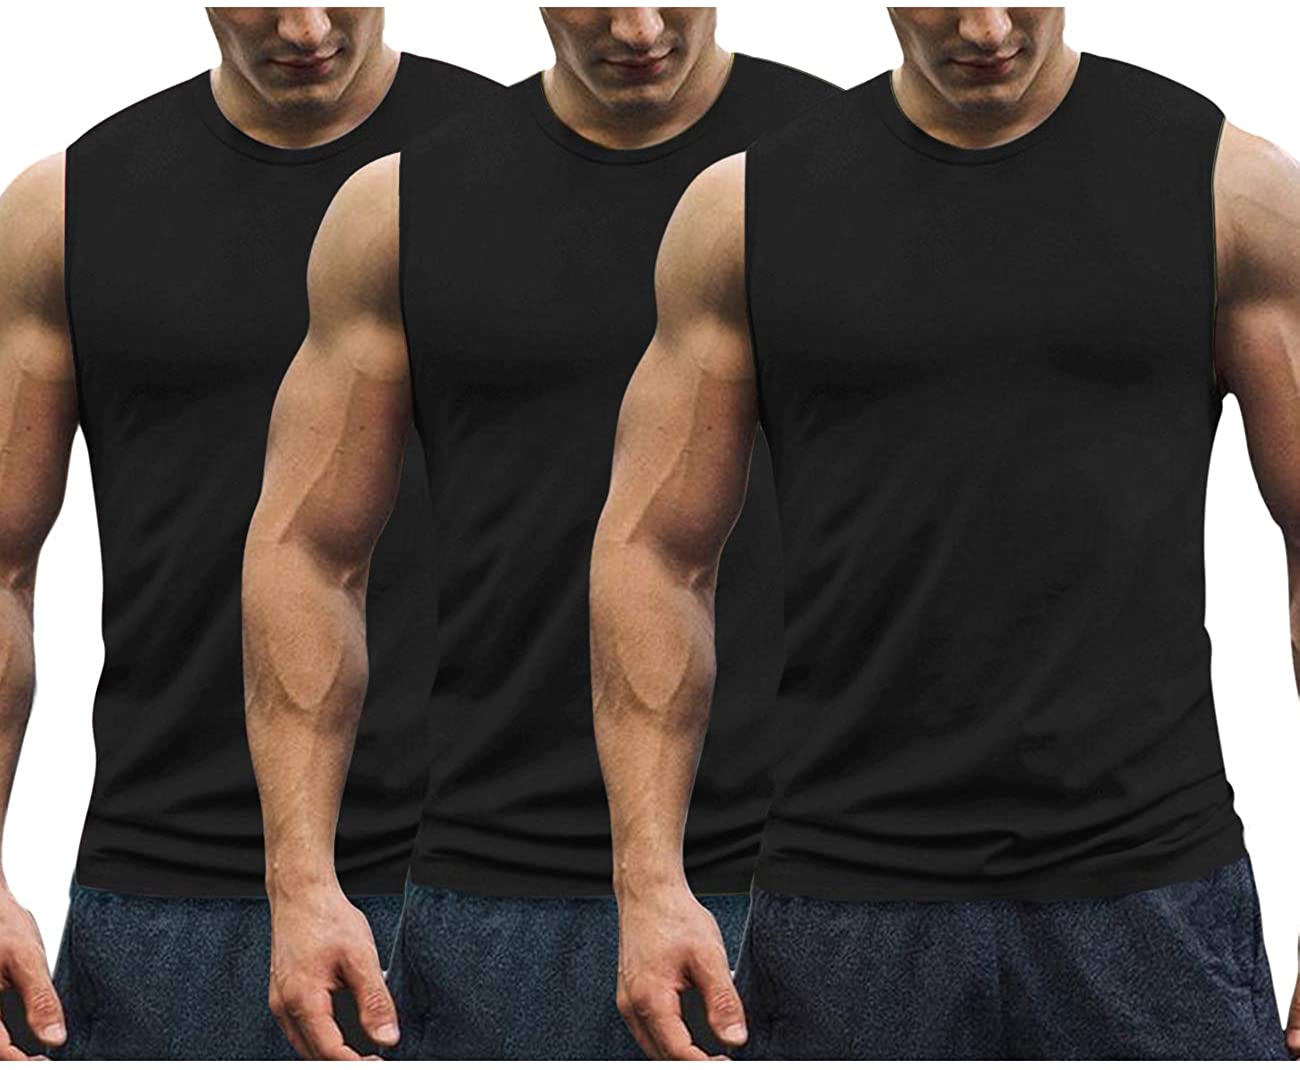 COOFANDY Mens Workout Tank Tops 3 Pack Quick Dry Gym Muscle Tee Fitness Bodybuilding Training Sports Sleeveless T Shirt